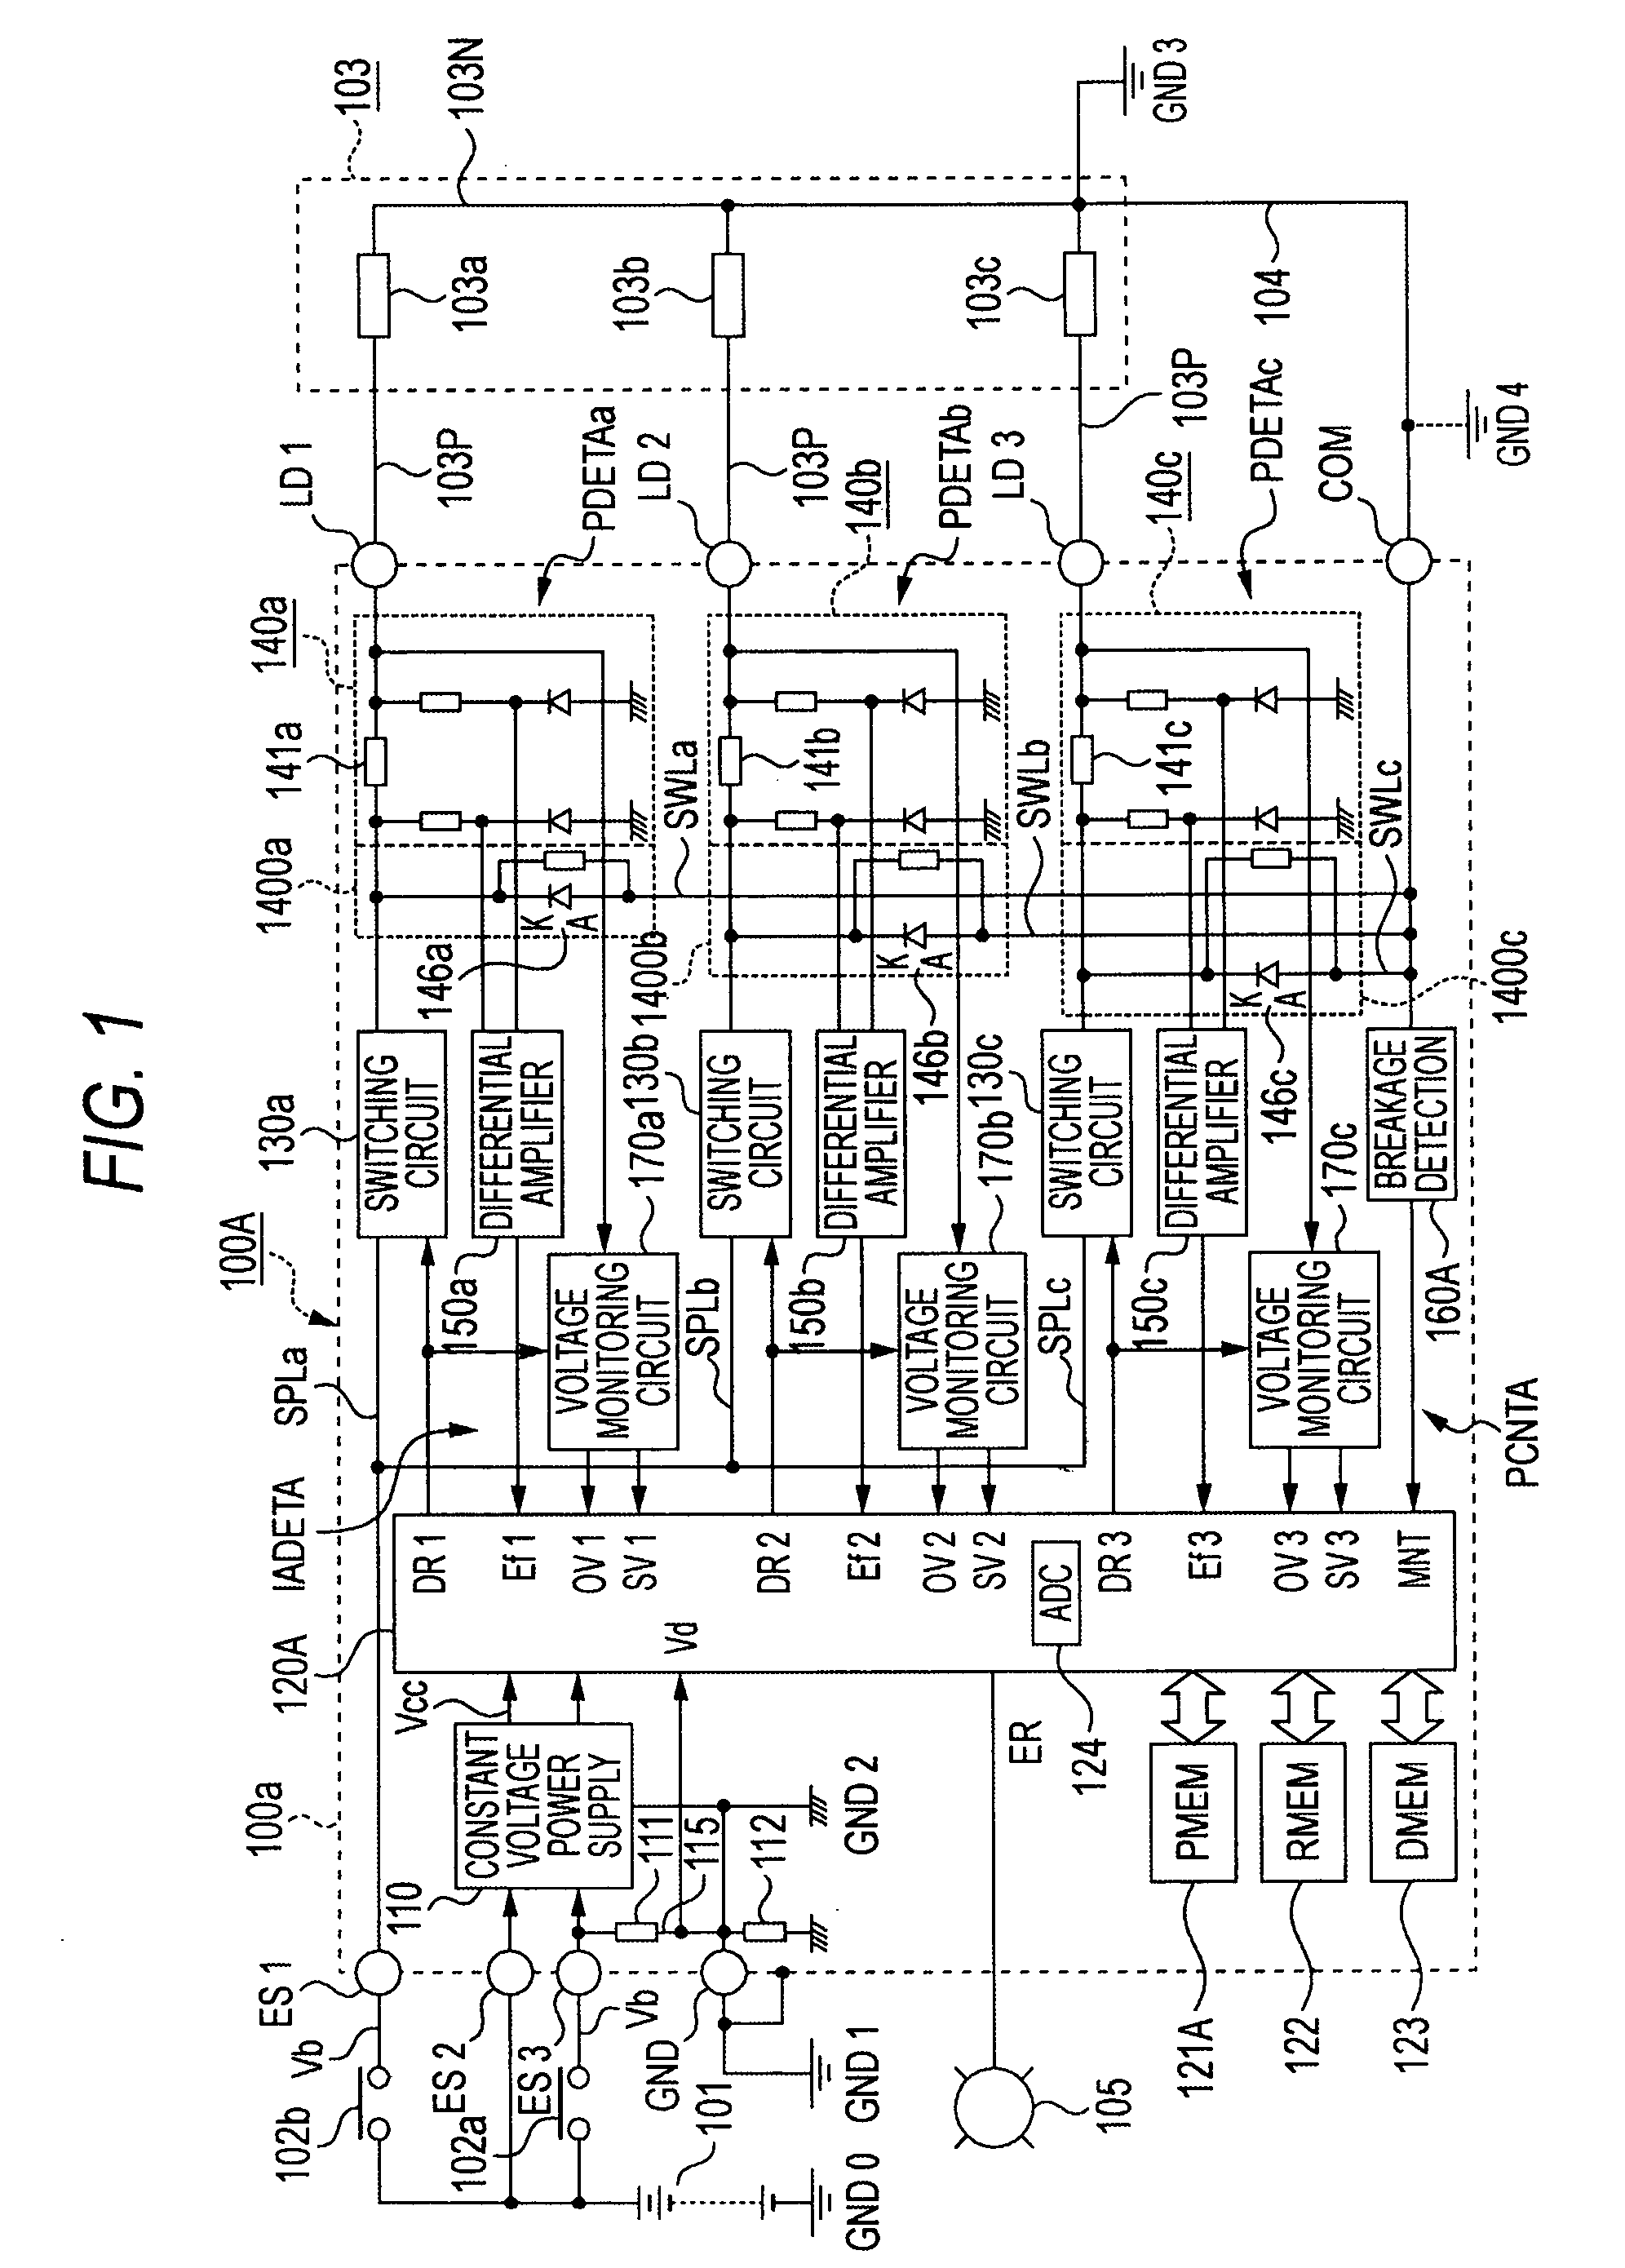 Power supply control device for on-vehicle electrical loads